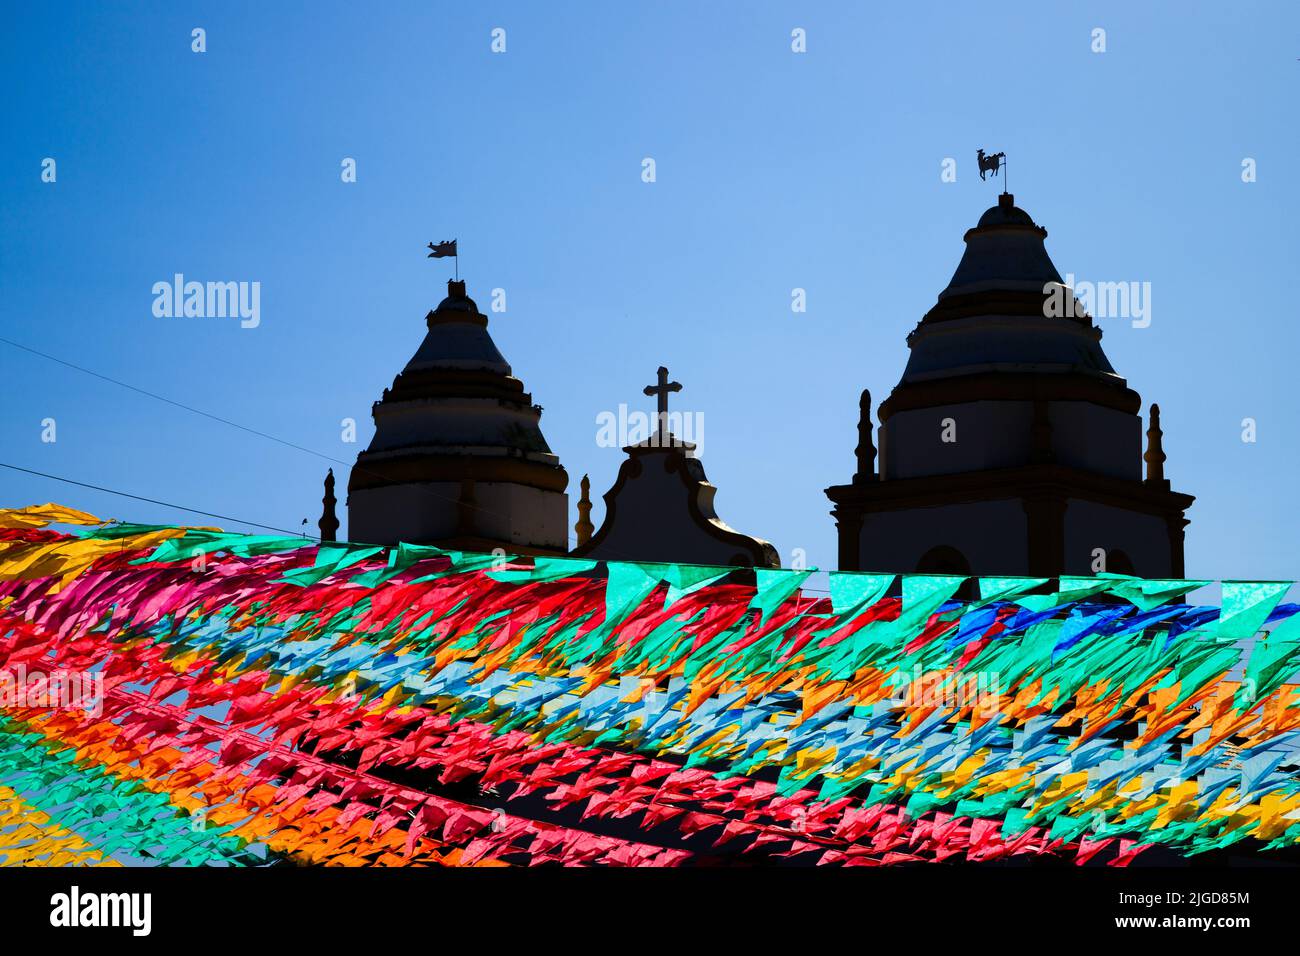 church in silhouette with decorative colorful flags of festa junina in brazil Stock Photo